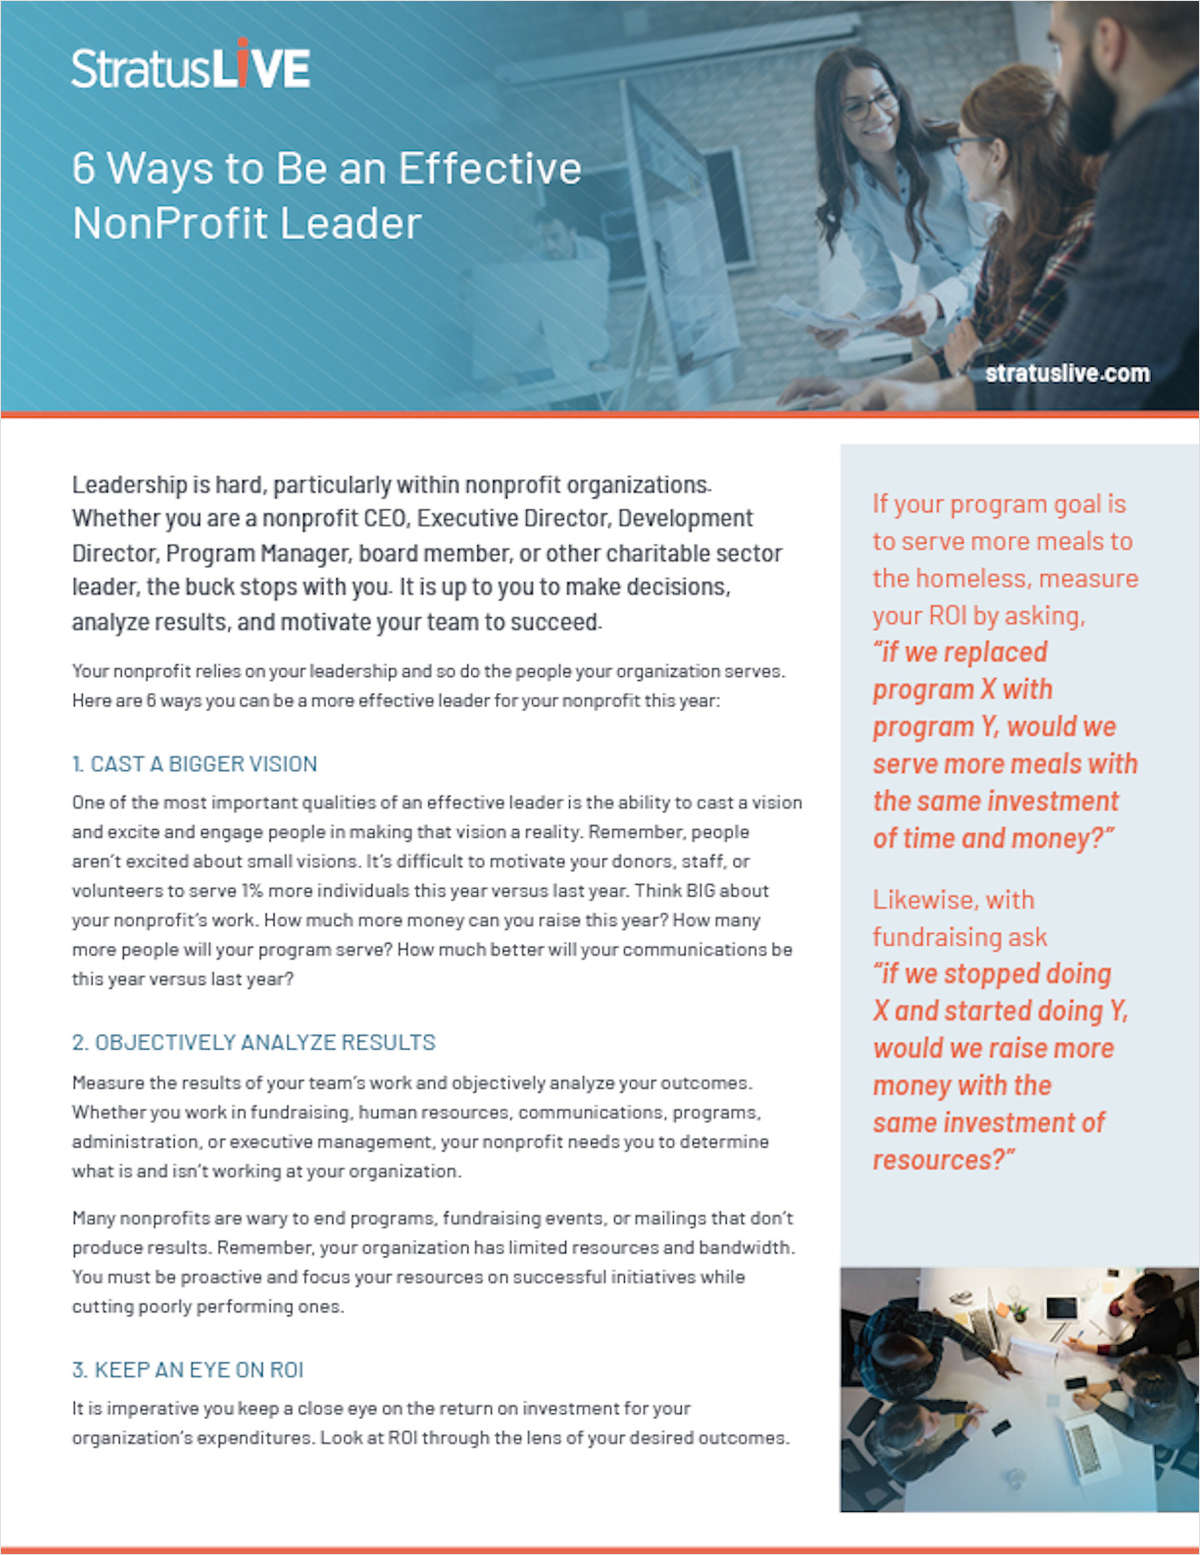 Six Ways to be an Effective NonProfit Leader